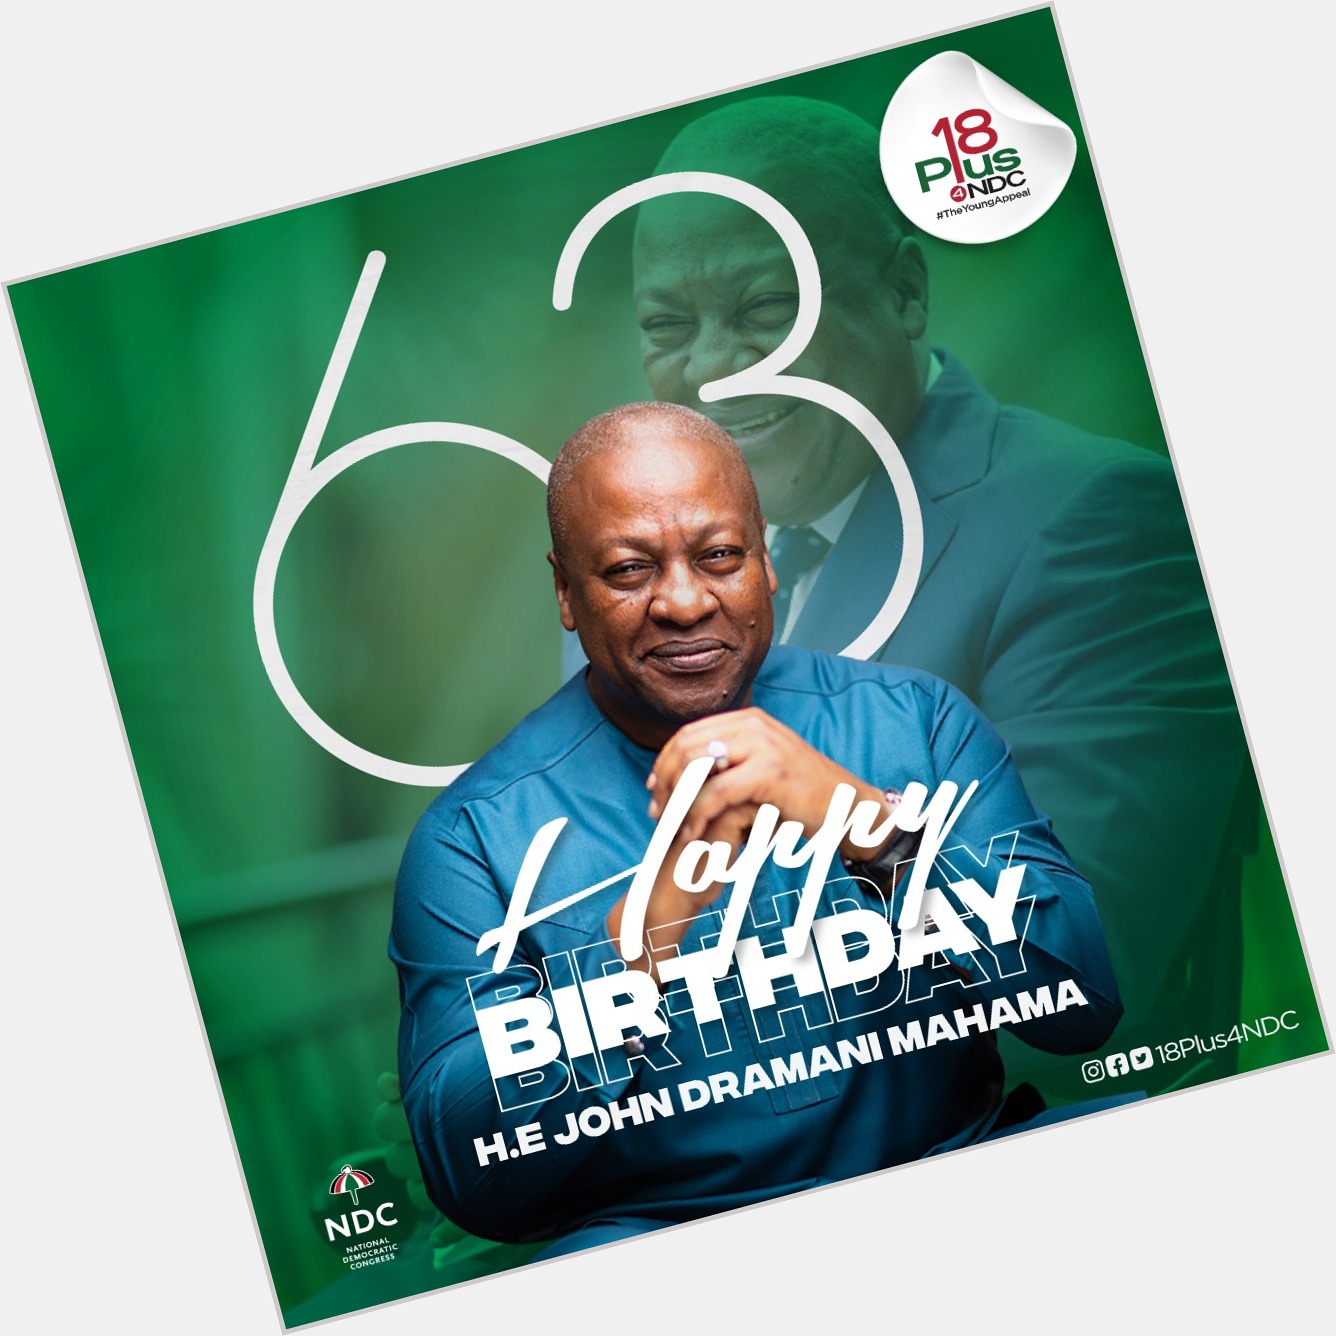 Happy birthday to you His excellency John Dramani Mahama, may the good lord grant you more grace to your elbow. 